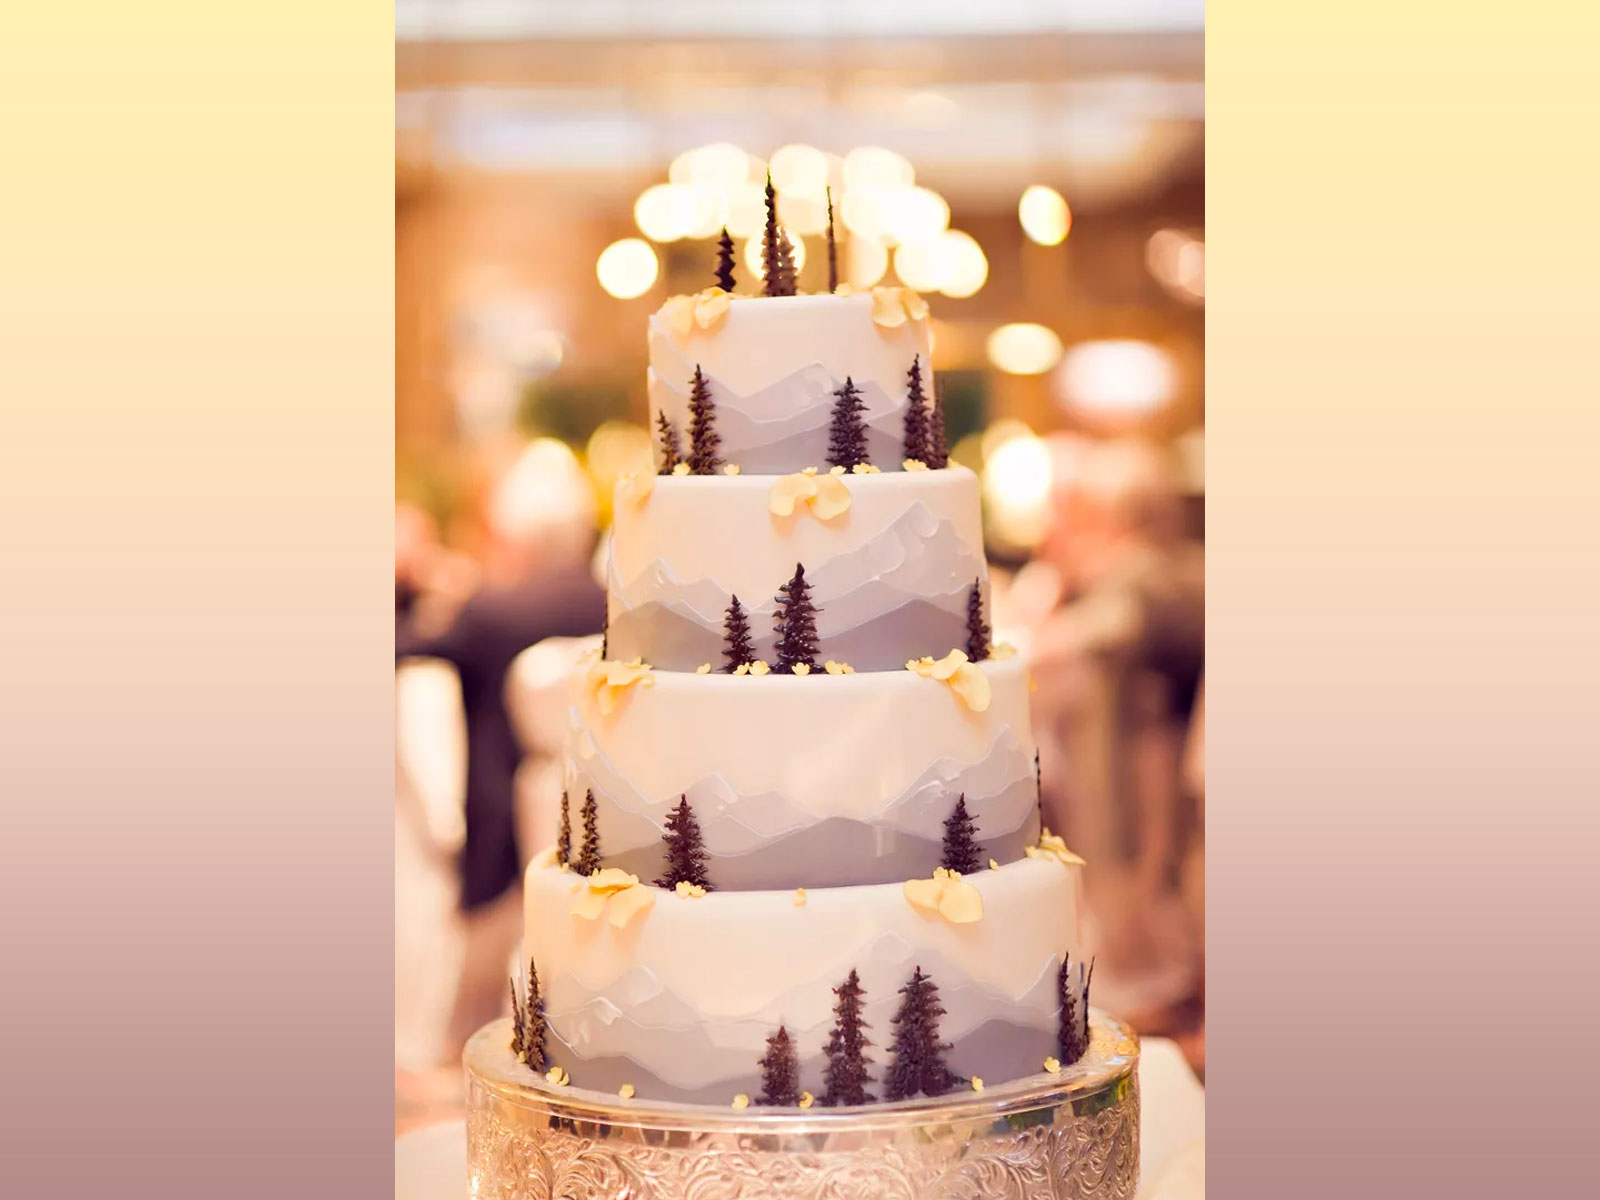 Rate These Wedding Cakes and We’ll Reveal What Your Next Boyfriend Will Be Like 318